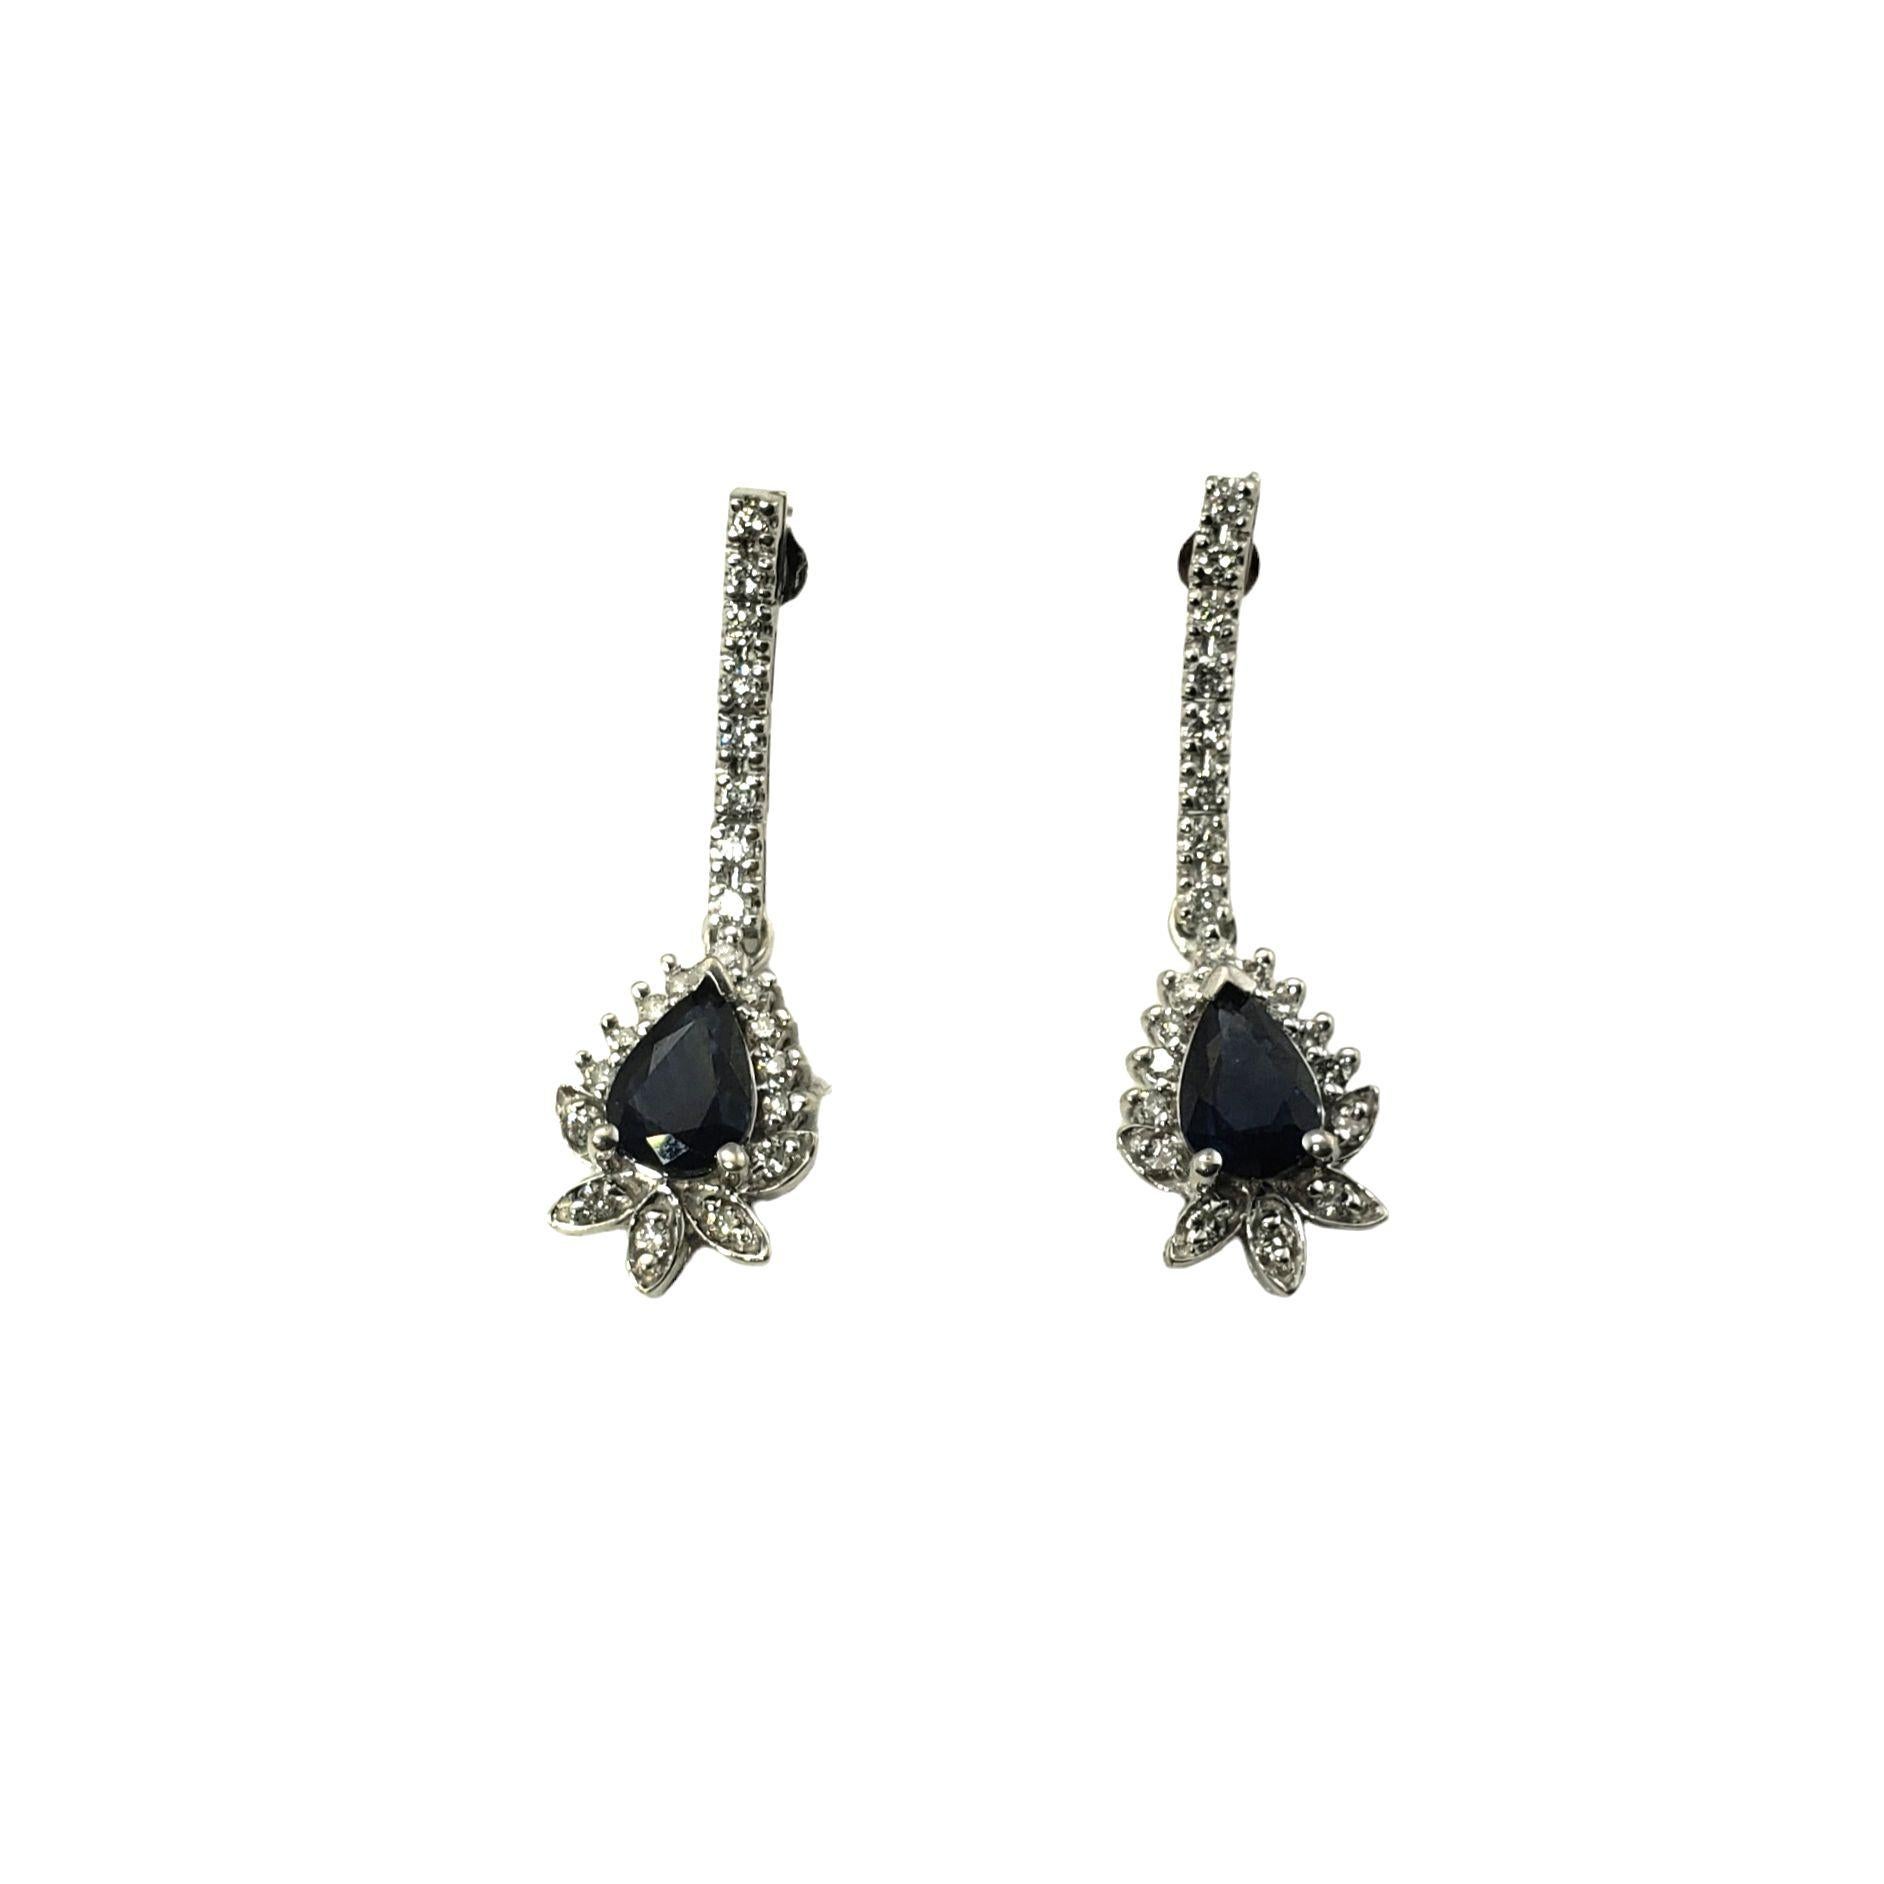 Vintage 14 Karat White Gold Natural Sapphire and Diamond Dangle Earrings-

These lovely earrings each feature one pear shaped sapphire (approx. 6.7 x 5.0 mm) and 44 round brilliant cut diamonds set in classic 14K white gold.  Push back